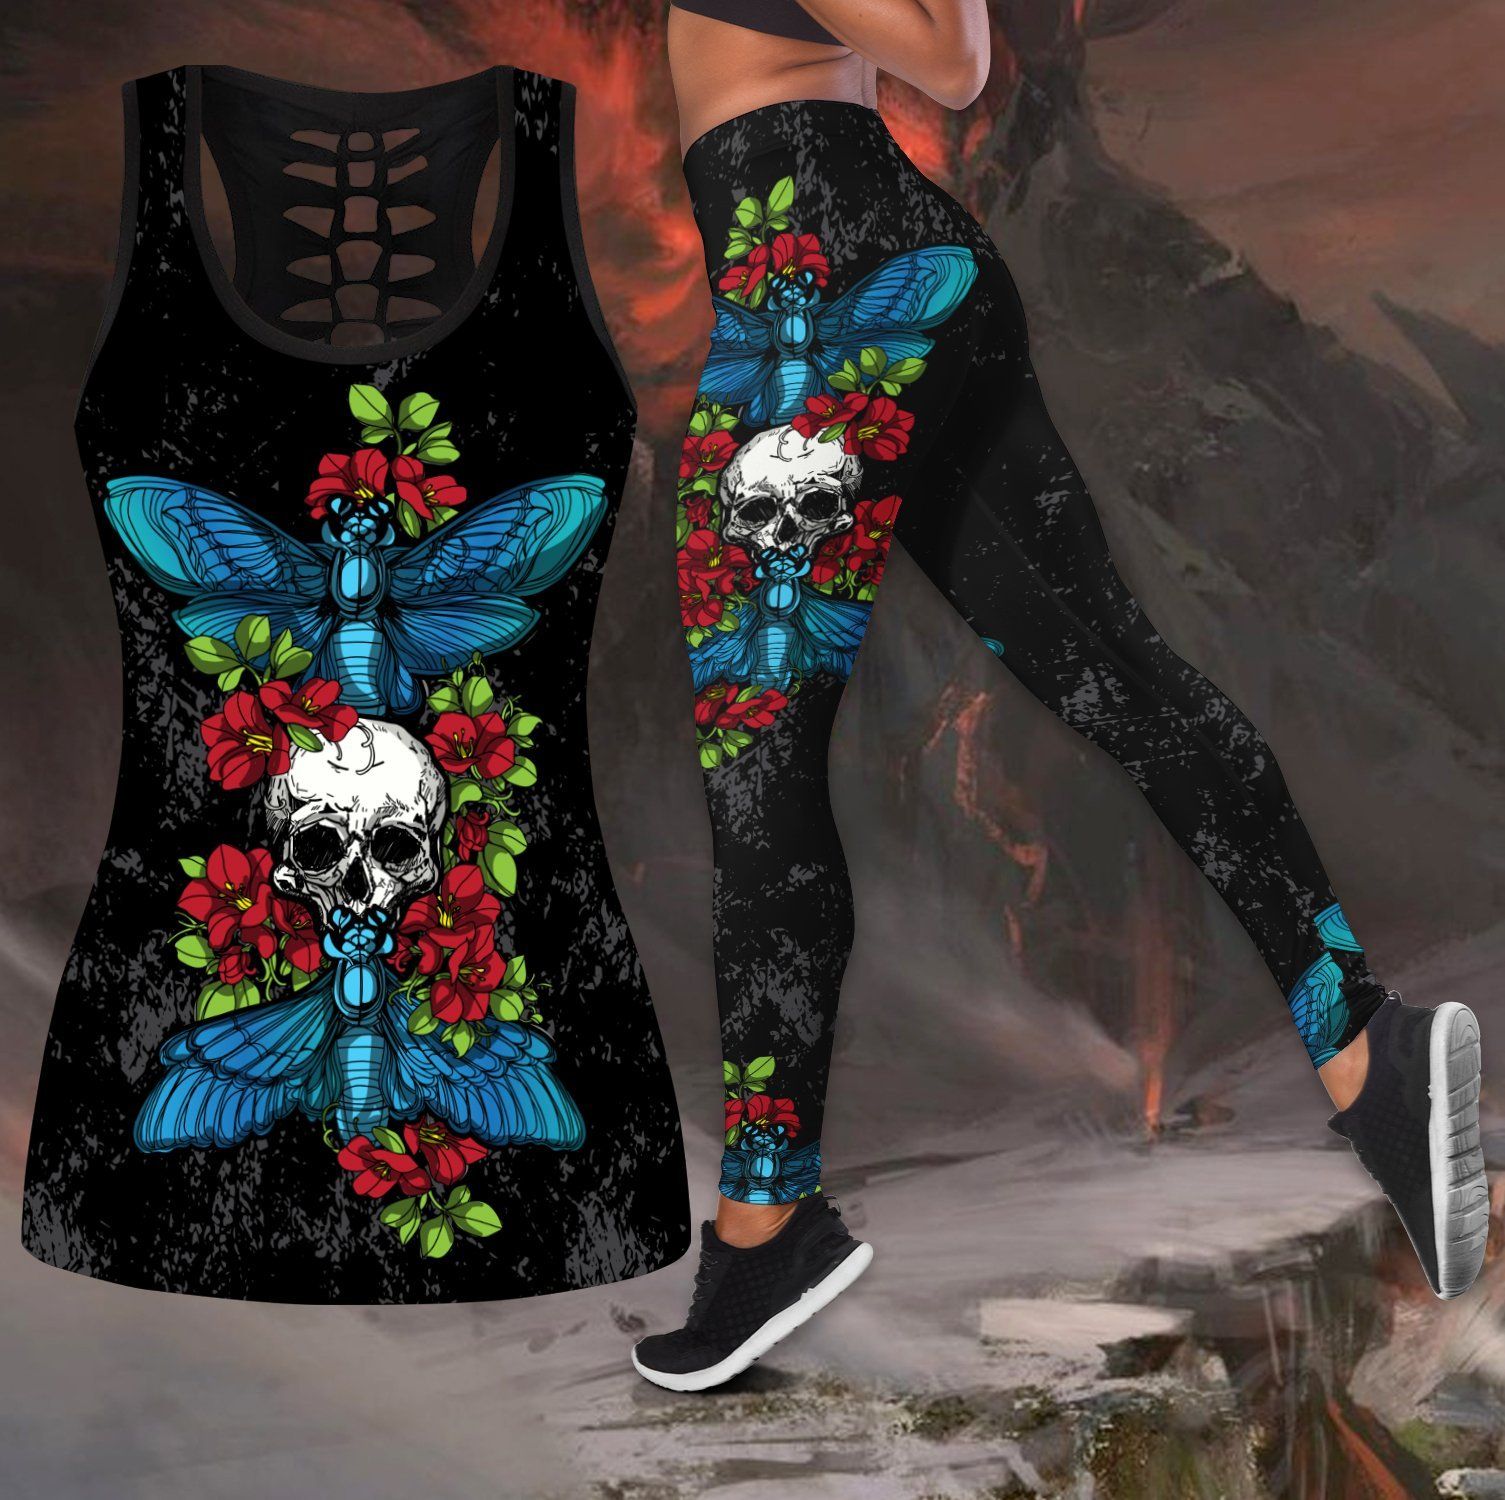 Butterfly Love Skull and Tattoos tanktop & legging outfit for women